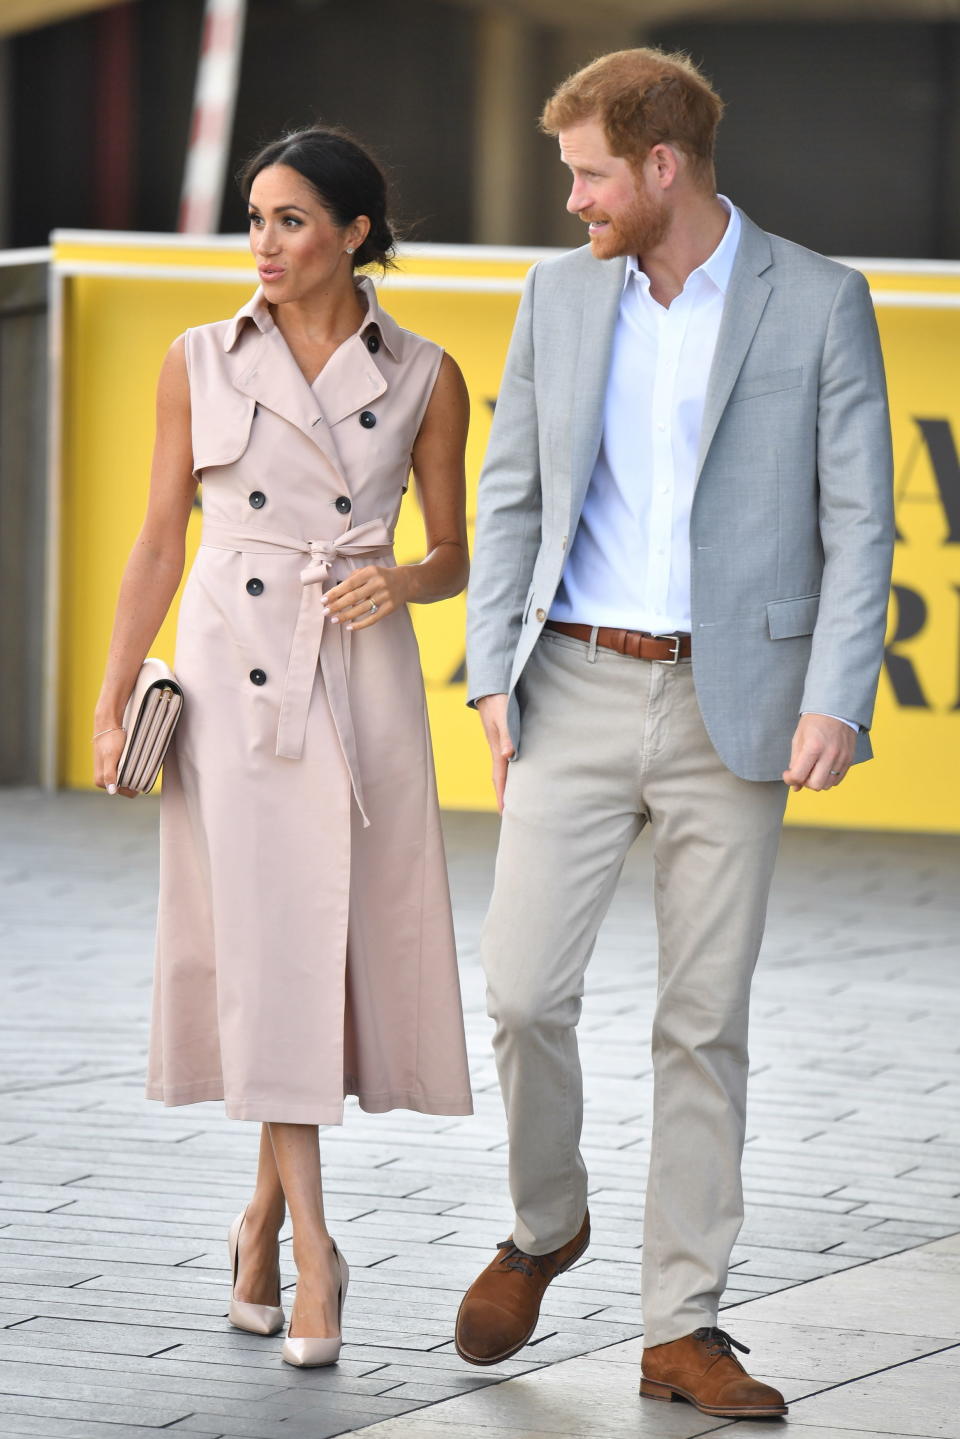 For the Southbank visit, the Duchess of Sussex kept cool in a sleeveless trench dress by House of Nonie [Photo: PA]